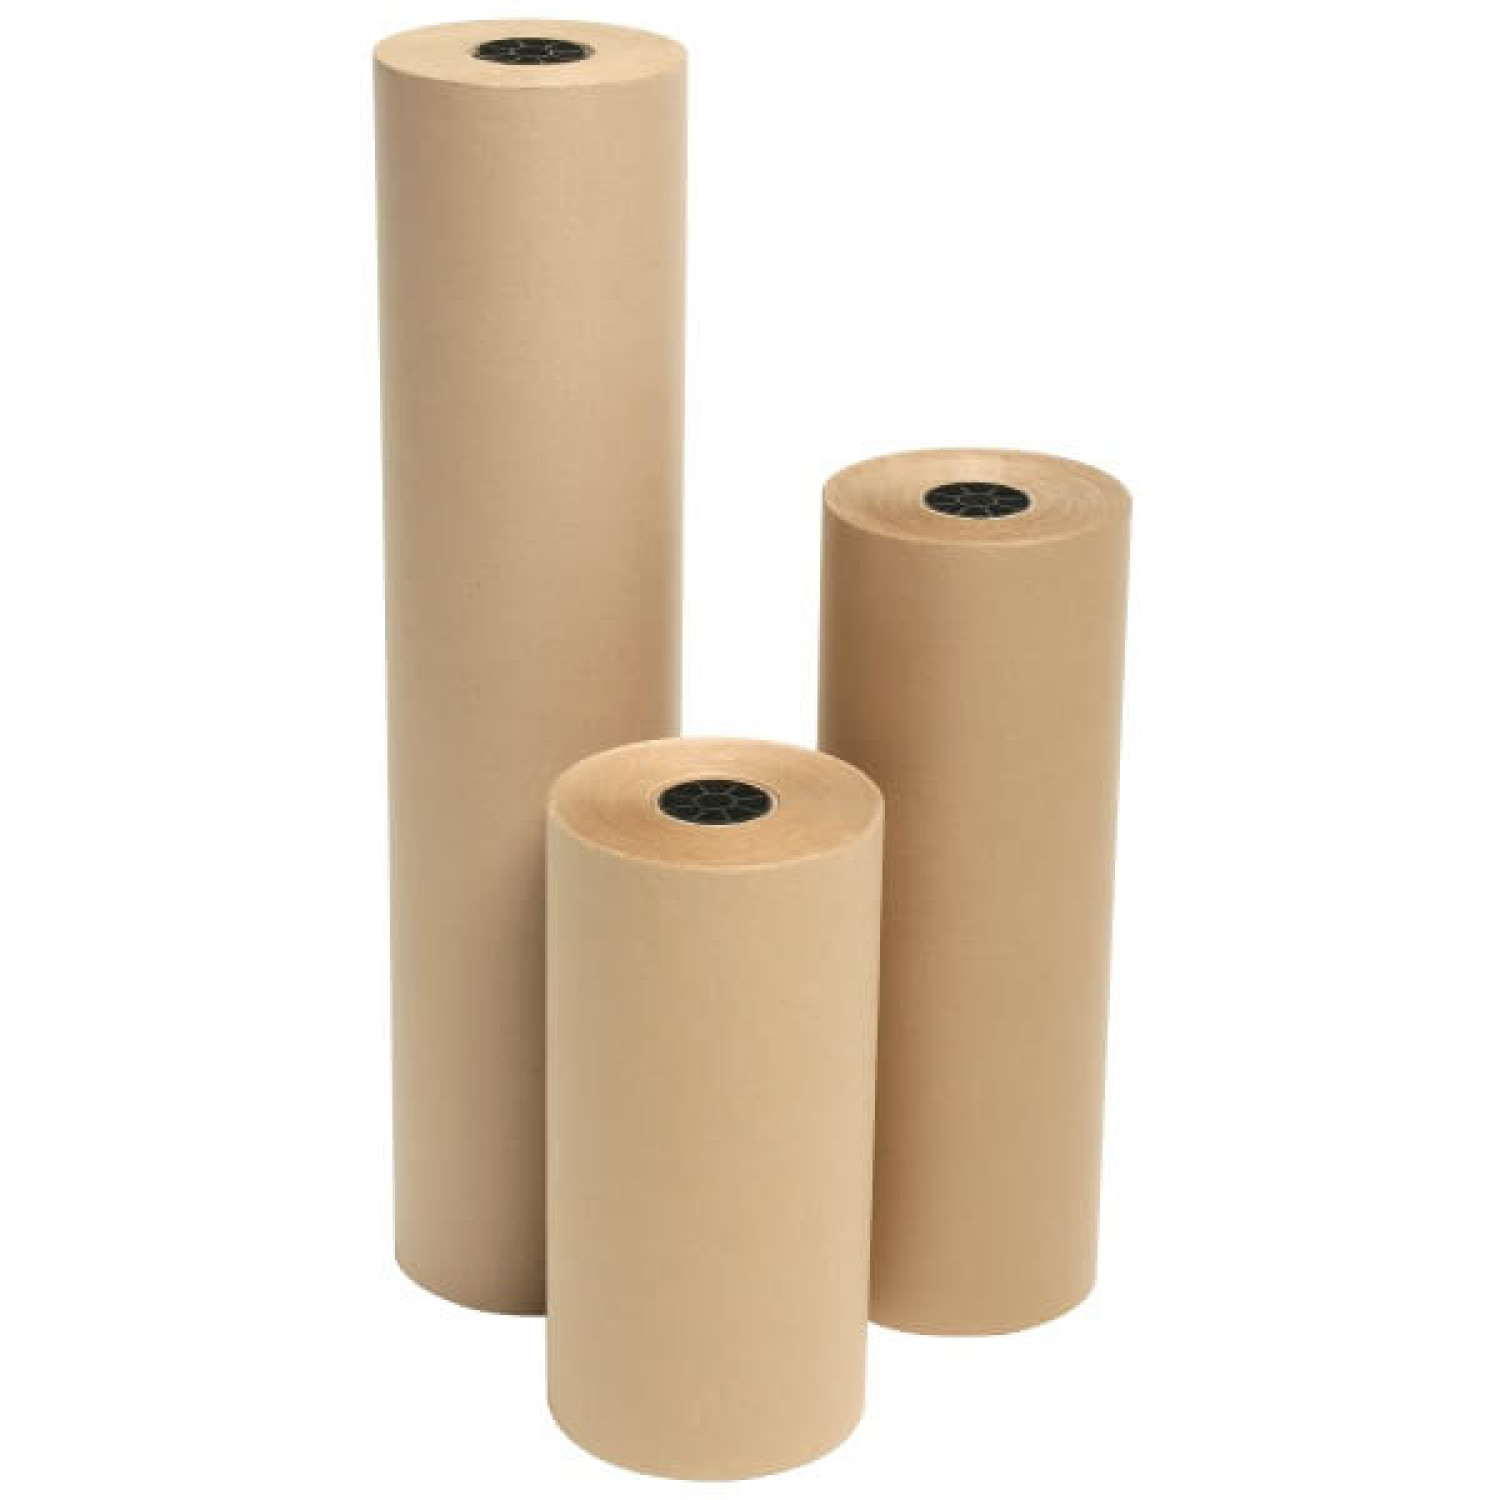 Large Brown Kraft Paper Roll - 36 x 1200 (100 ft) - Made in USA - Ideal  for Gift Wrapping, Packing, Moving, Postal, Shipping, Parcel, Wall Art